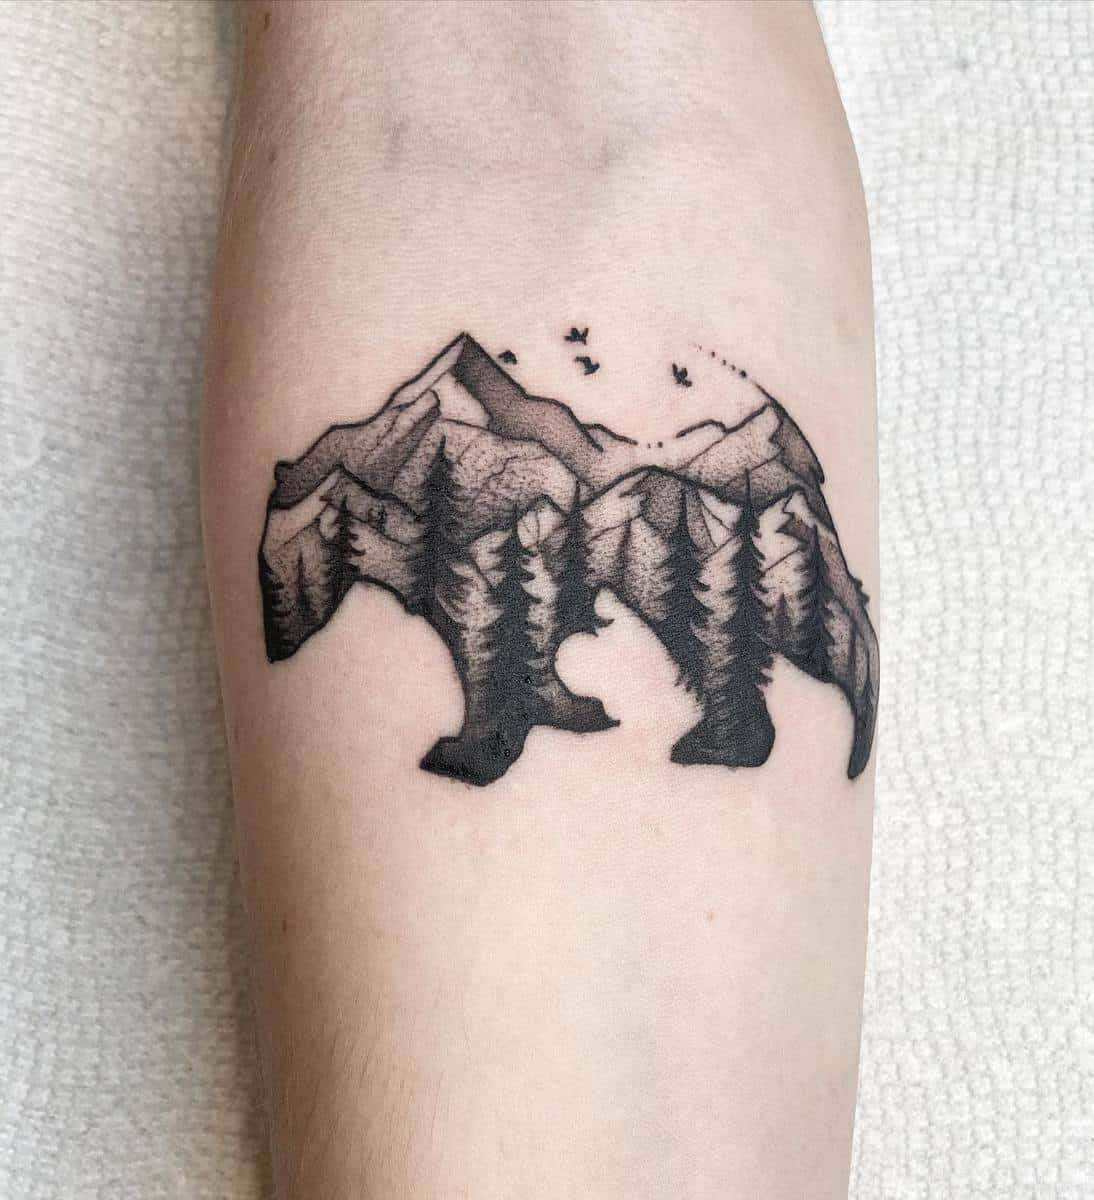 Tom B Stone Tattoos  Mountain Bear done by Tracy Marie  Online Booking  Available   Shop is open MonThur 11a7p FriSat 11a9p  Facebook